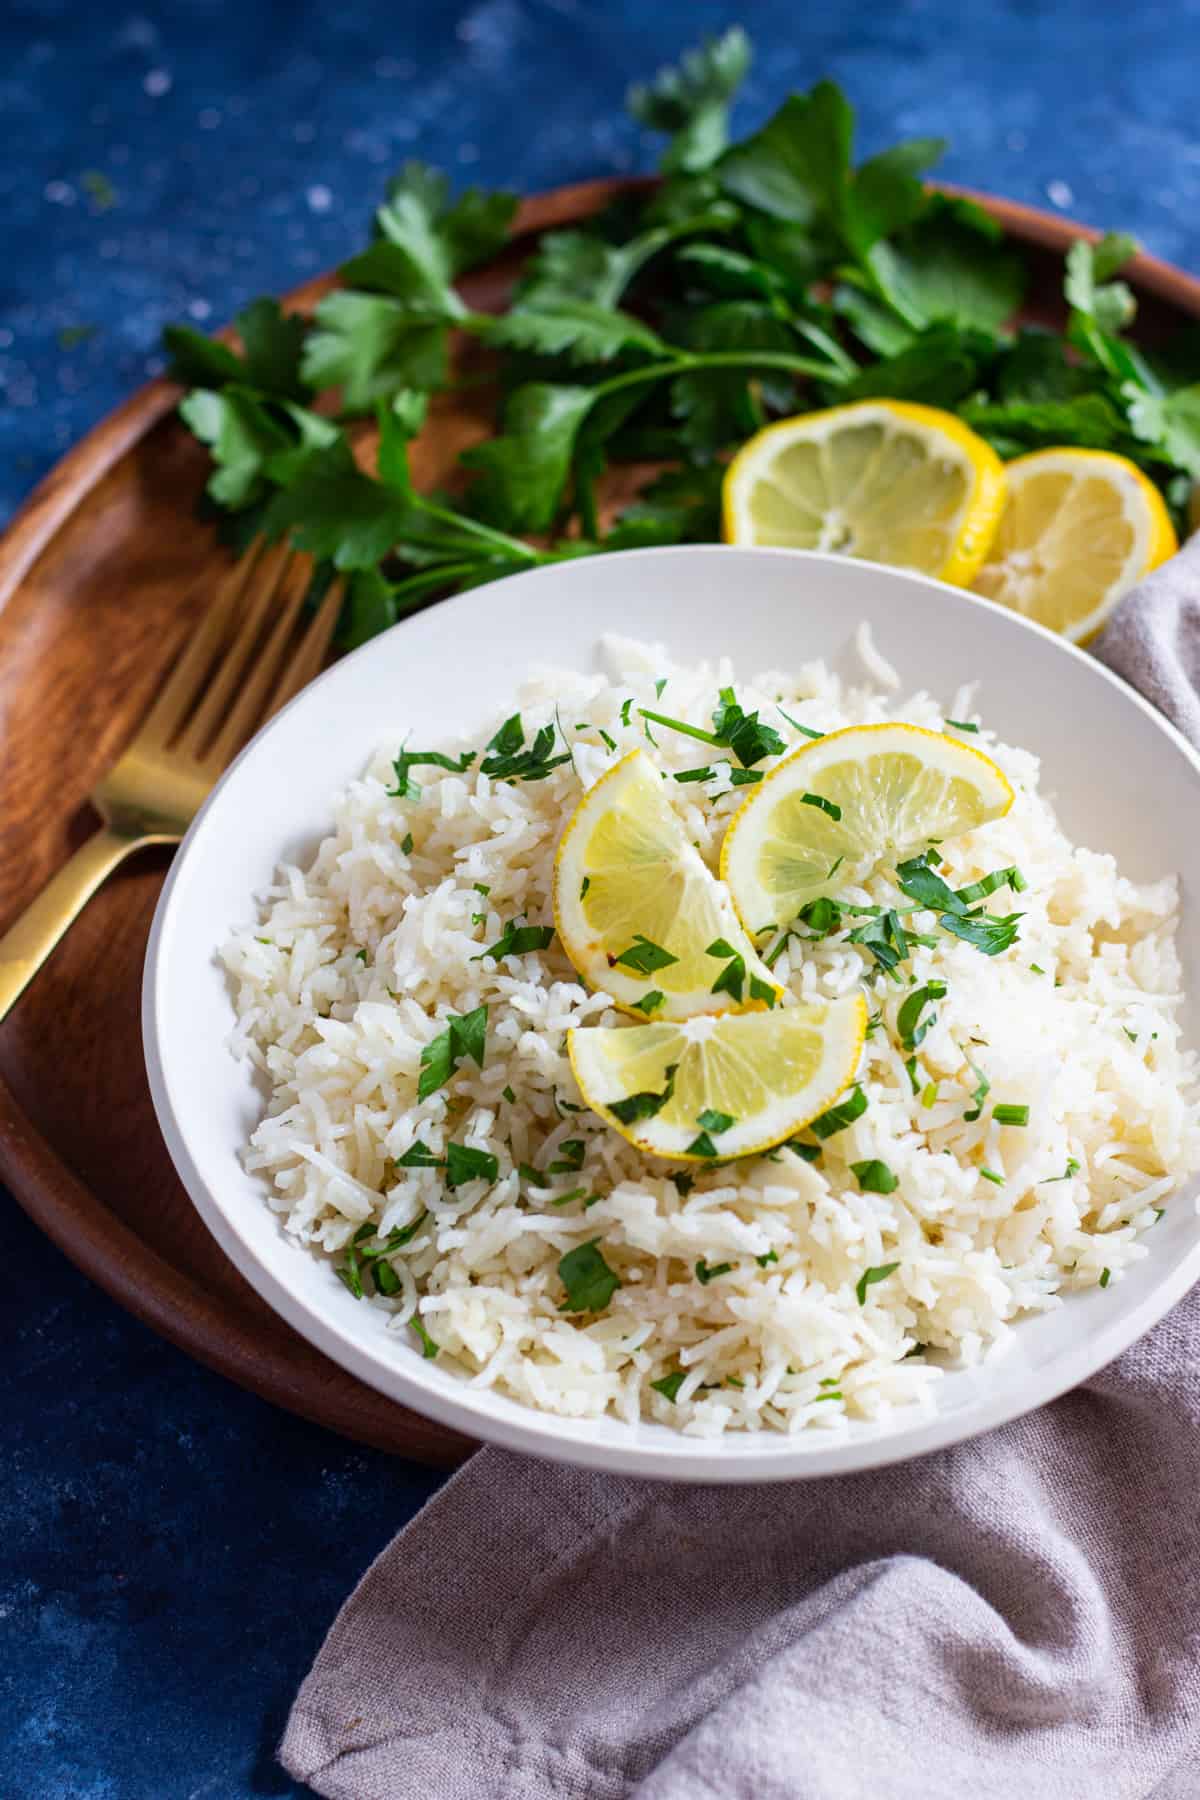 This Greek lemon rice recipe is ready in 30 minutes. The lemon and garlic add a lot of flavor to this Greek rice which can be served as a side dish but you might just want to have it on its own!
